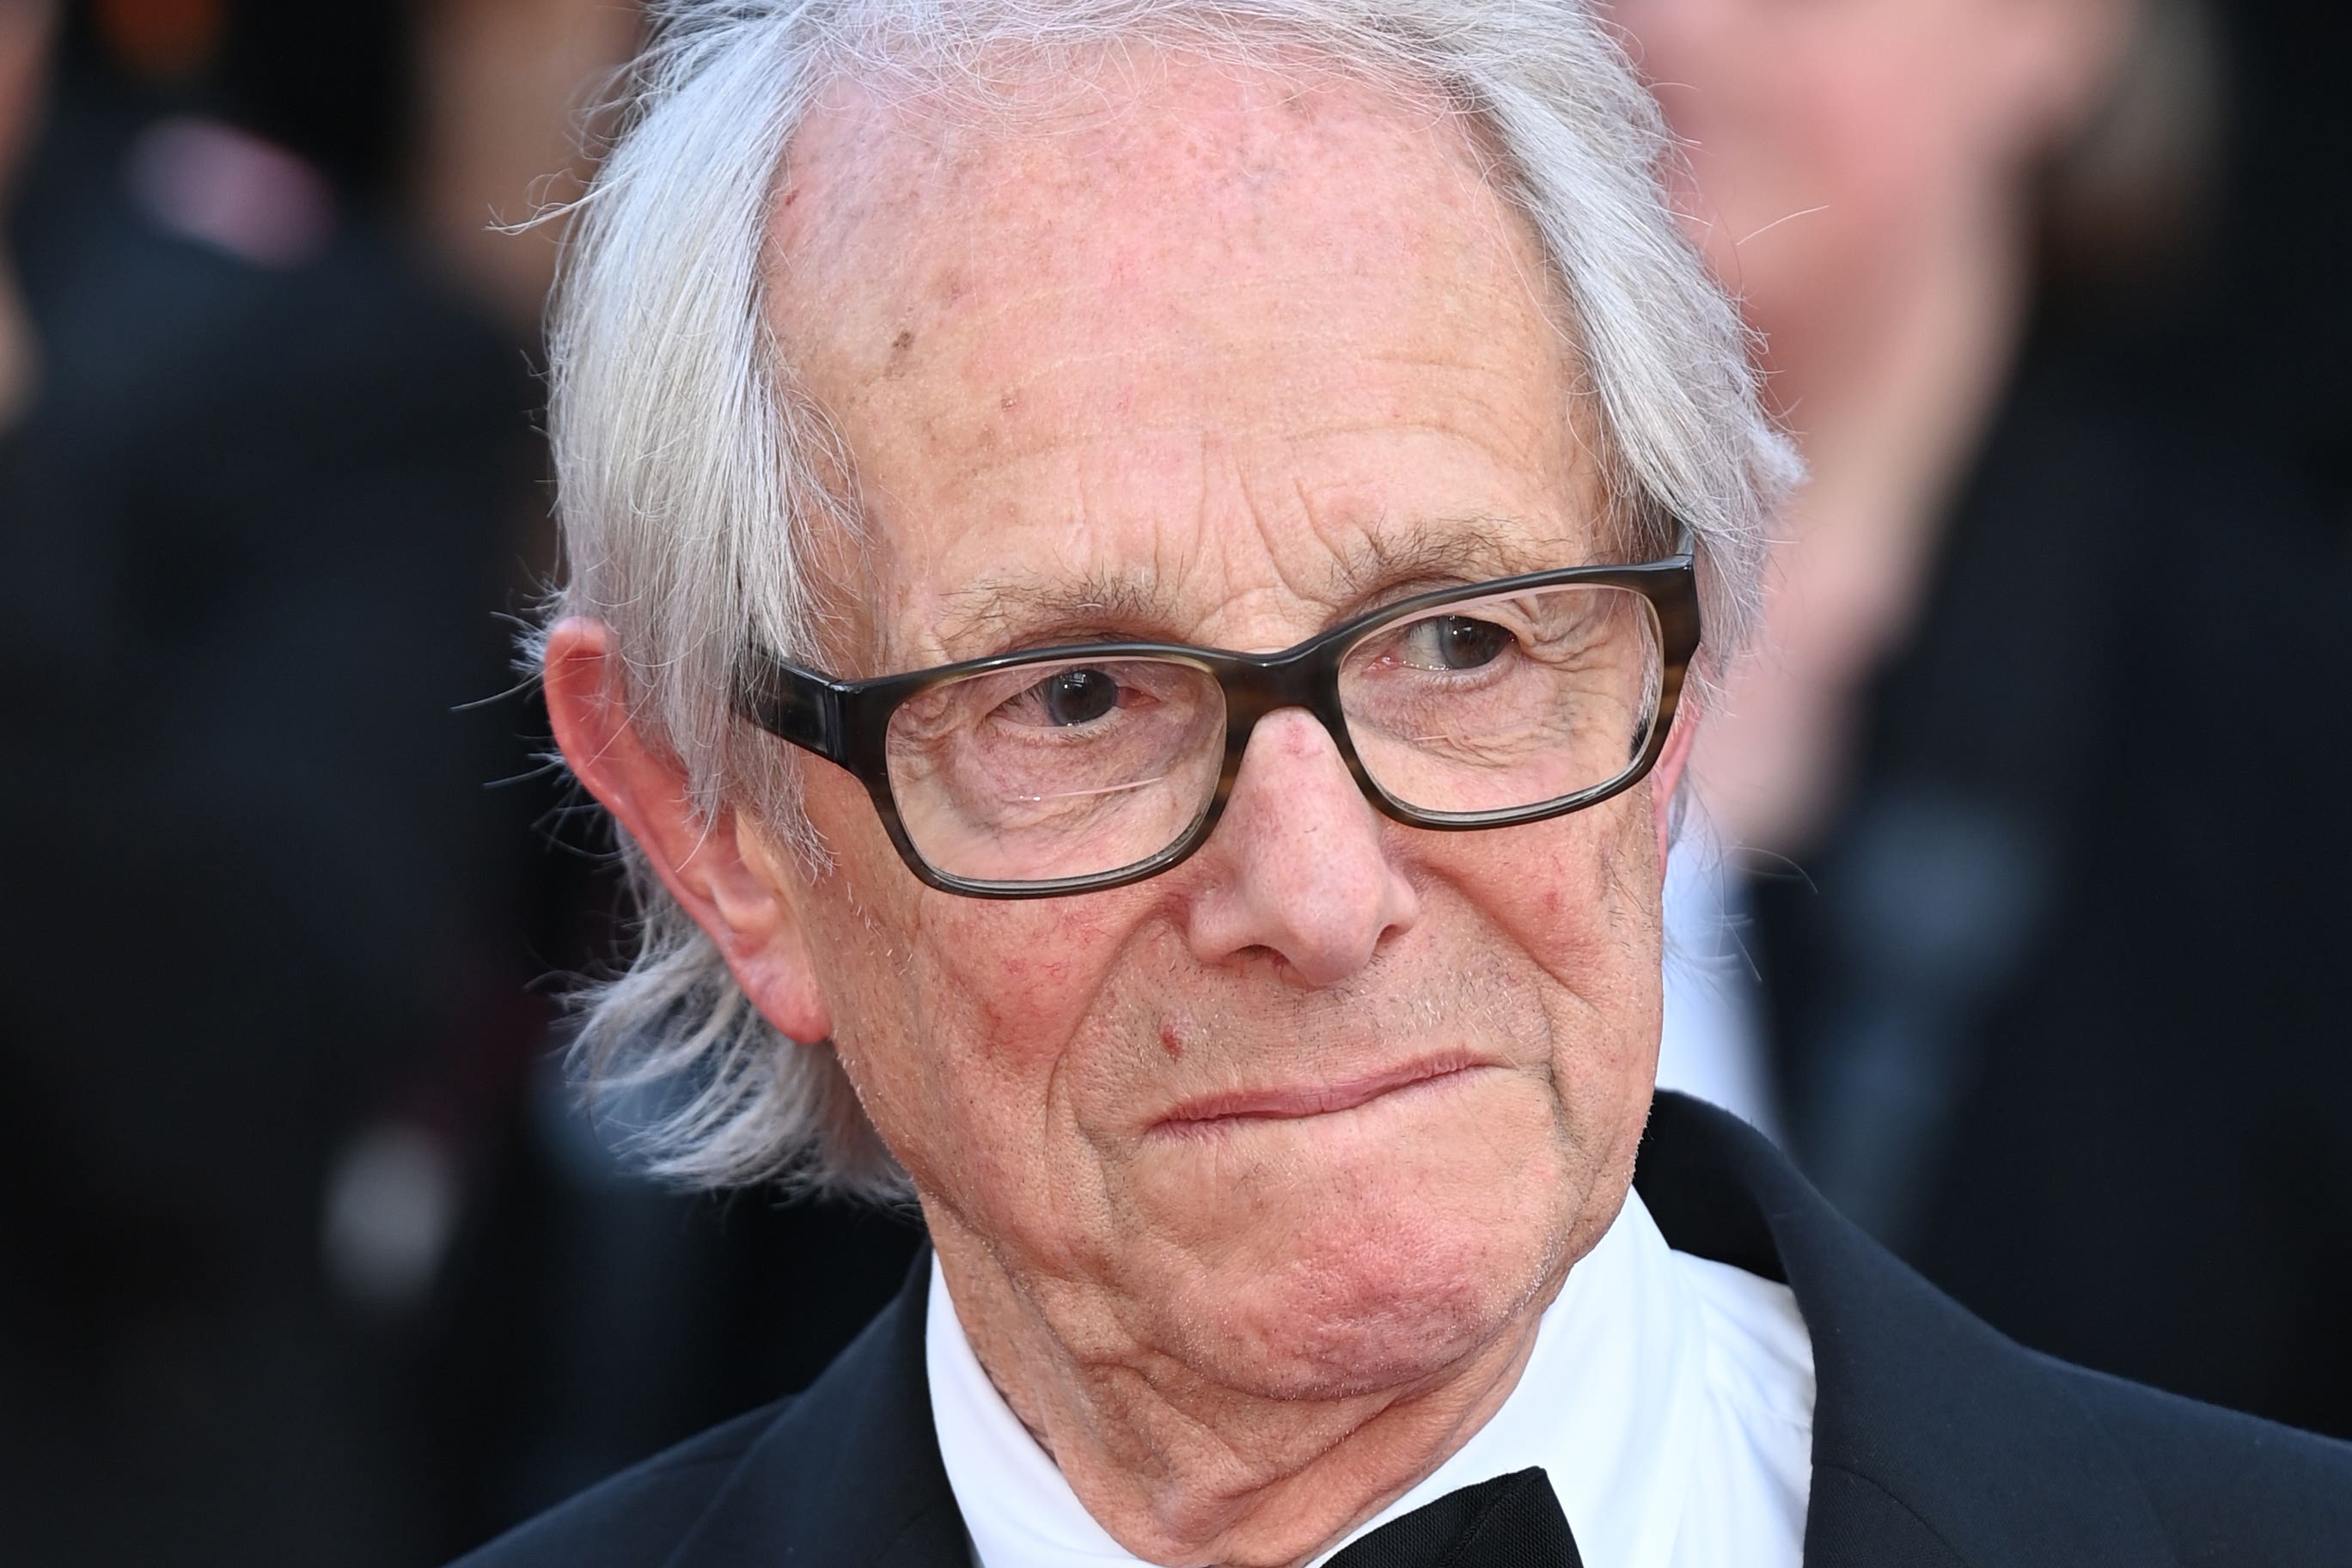 Ken Loach has resigned as a patron of the cinema over the film screening, dubbing it ‘simply unacceptable’